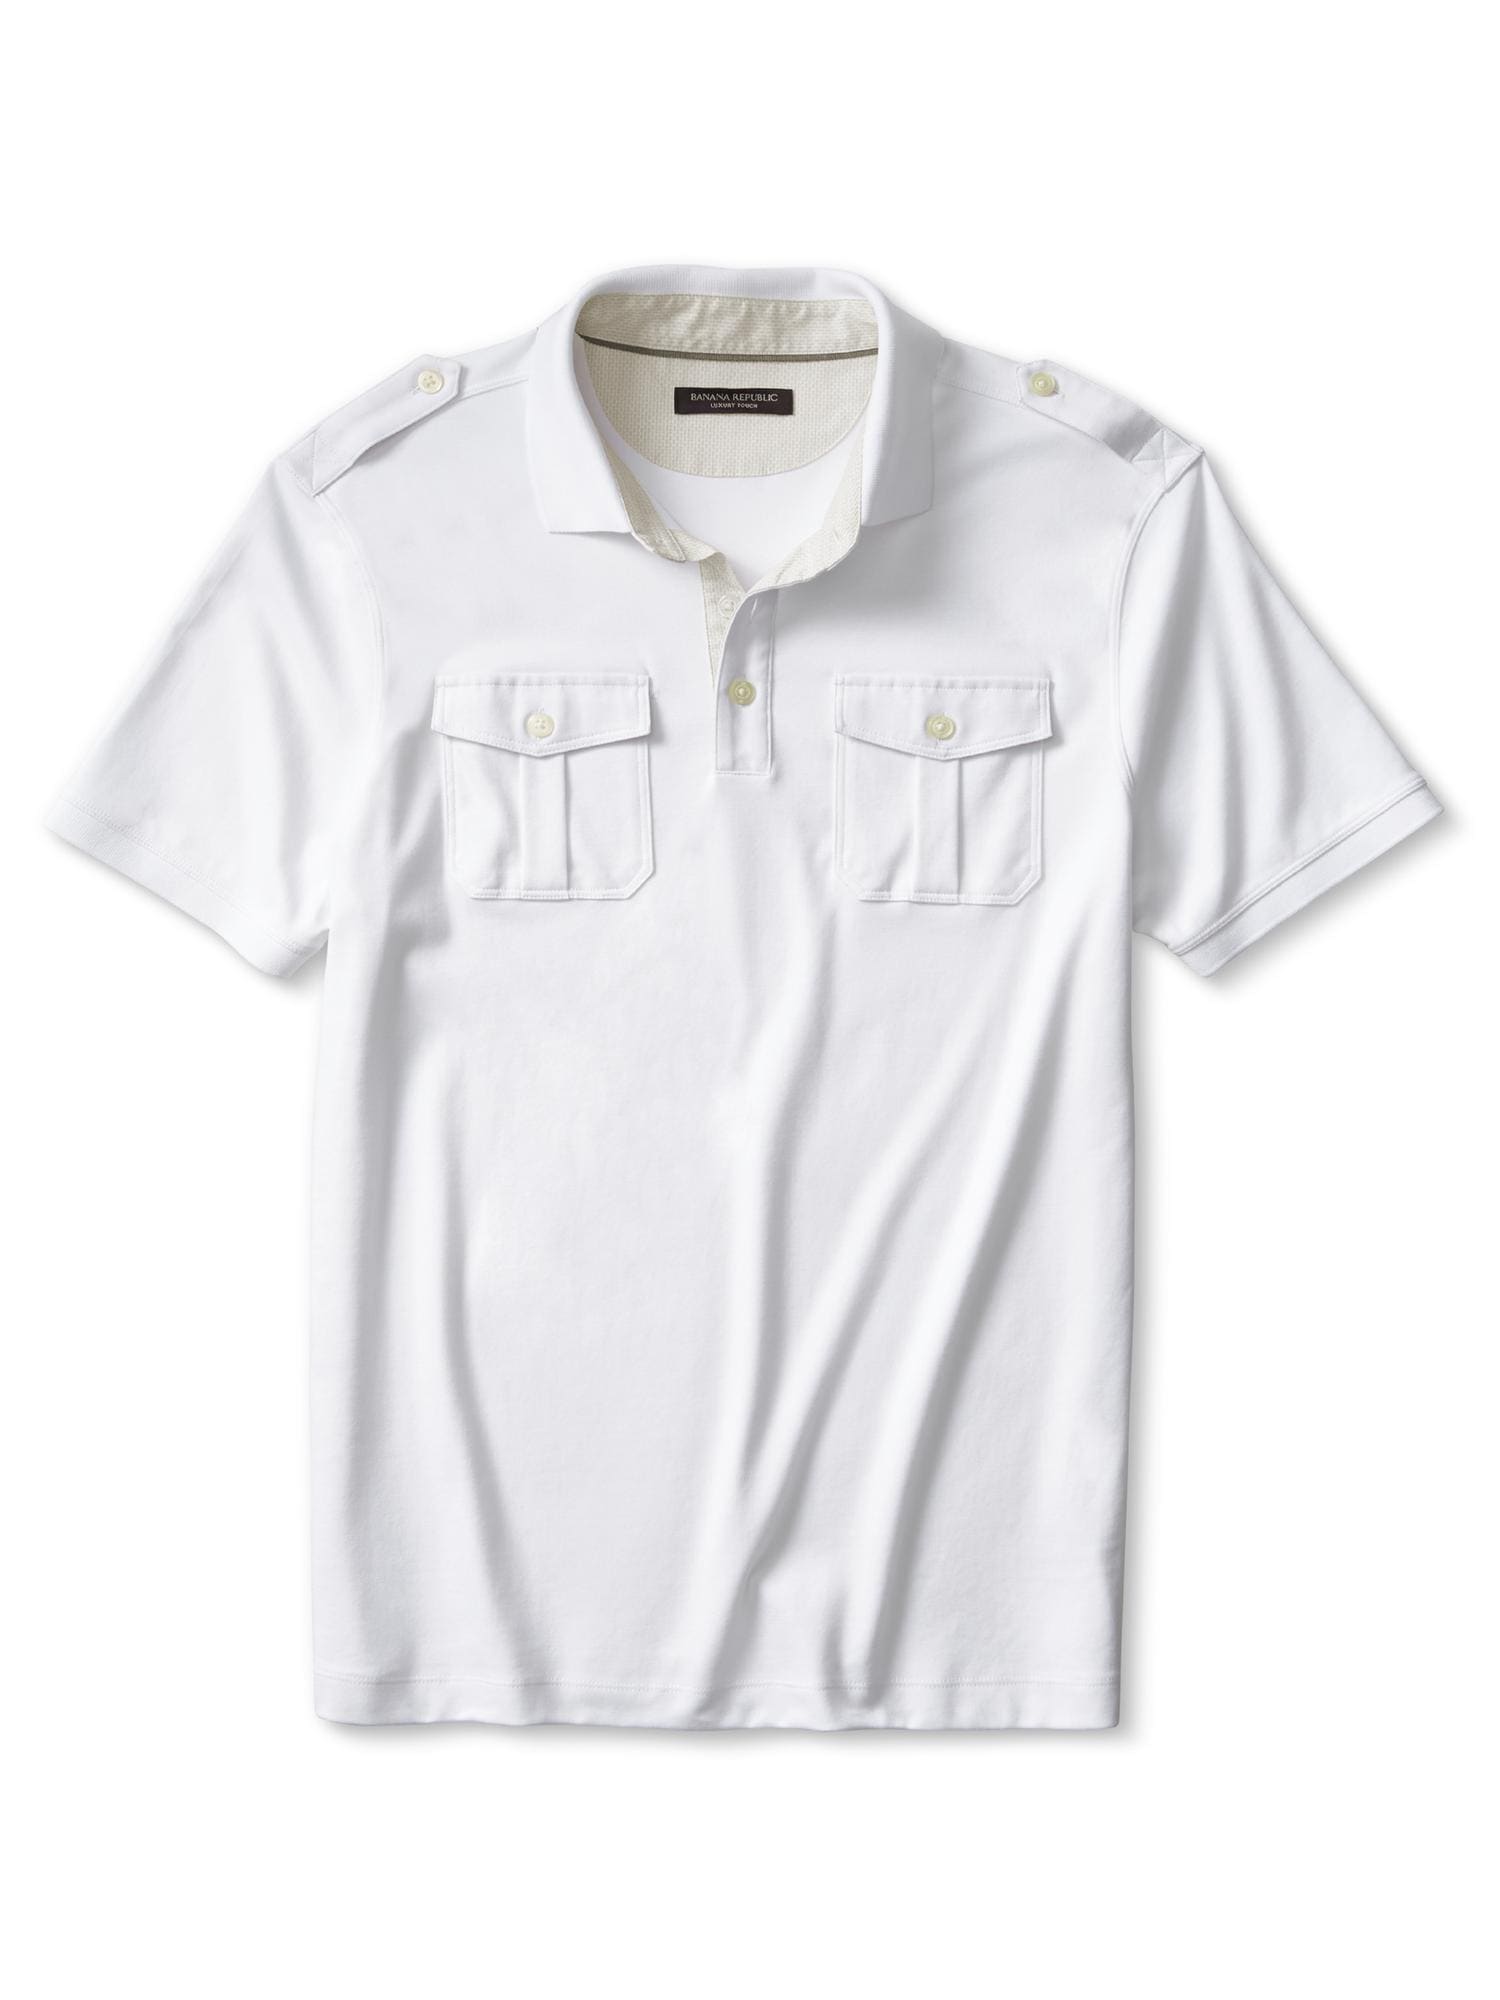 Luxe-Touch Short-Sleeve Utility Shirt